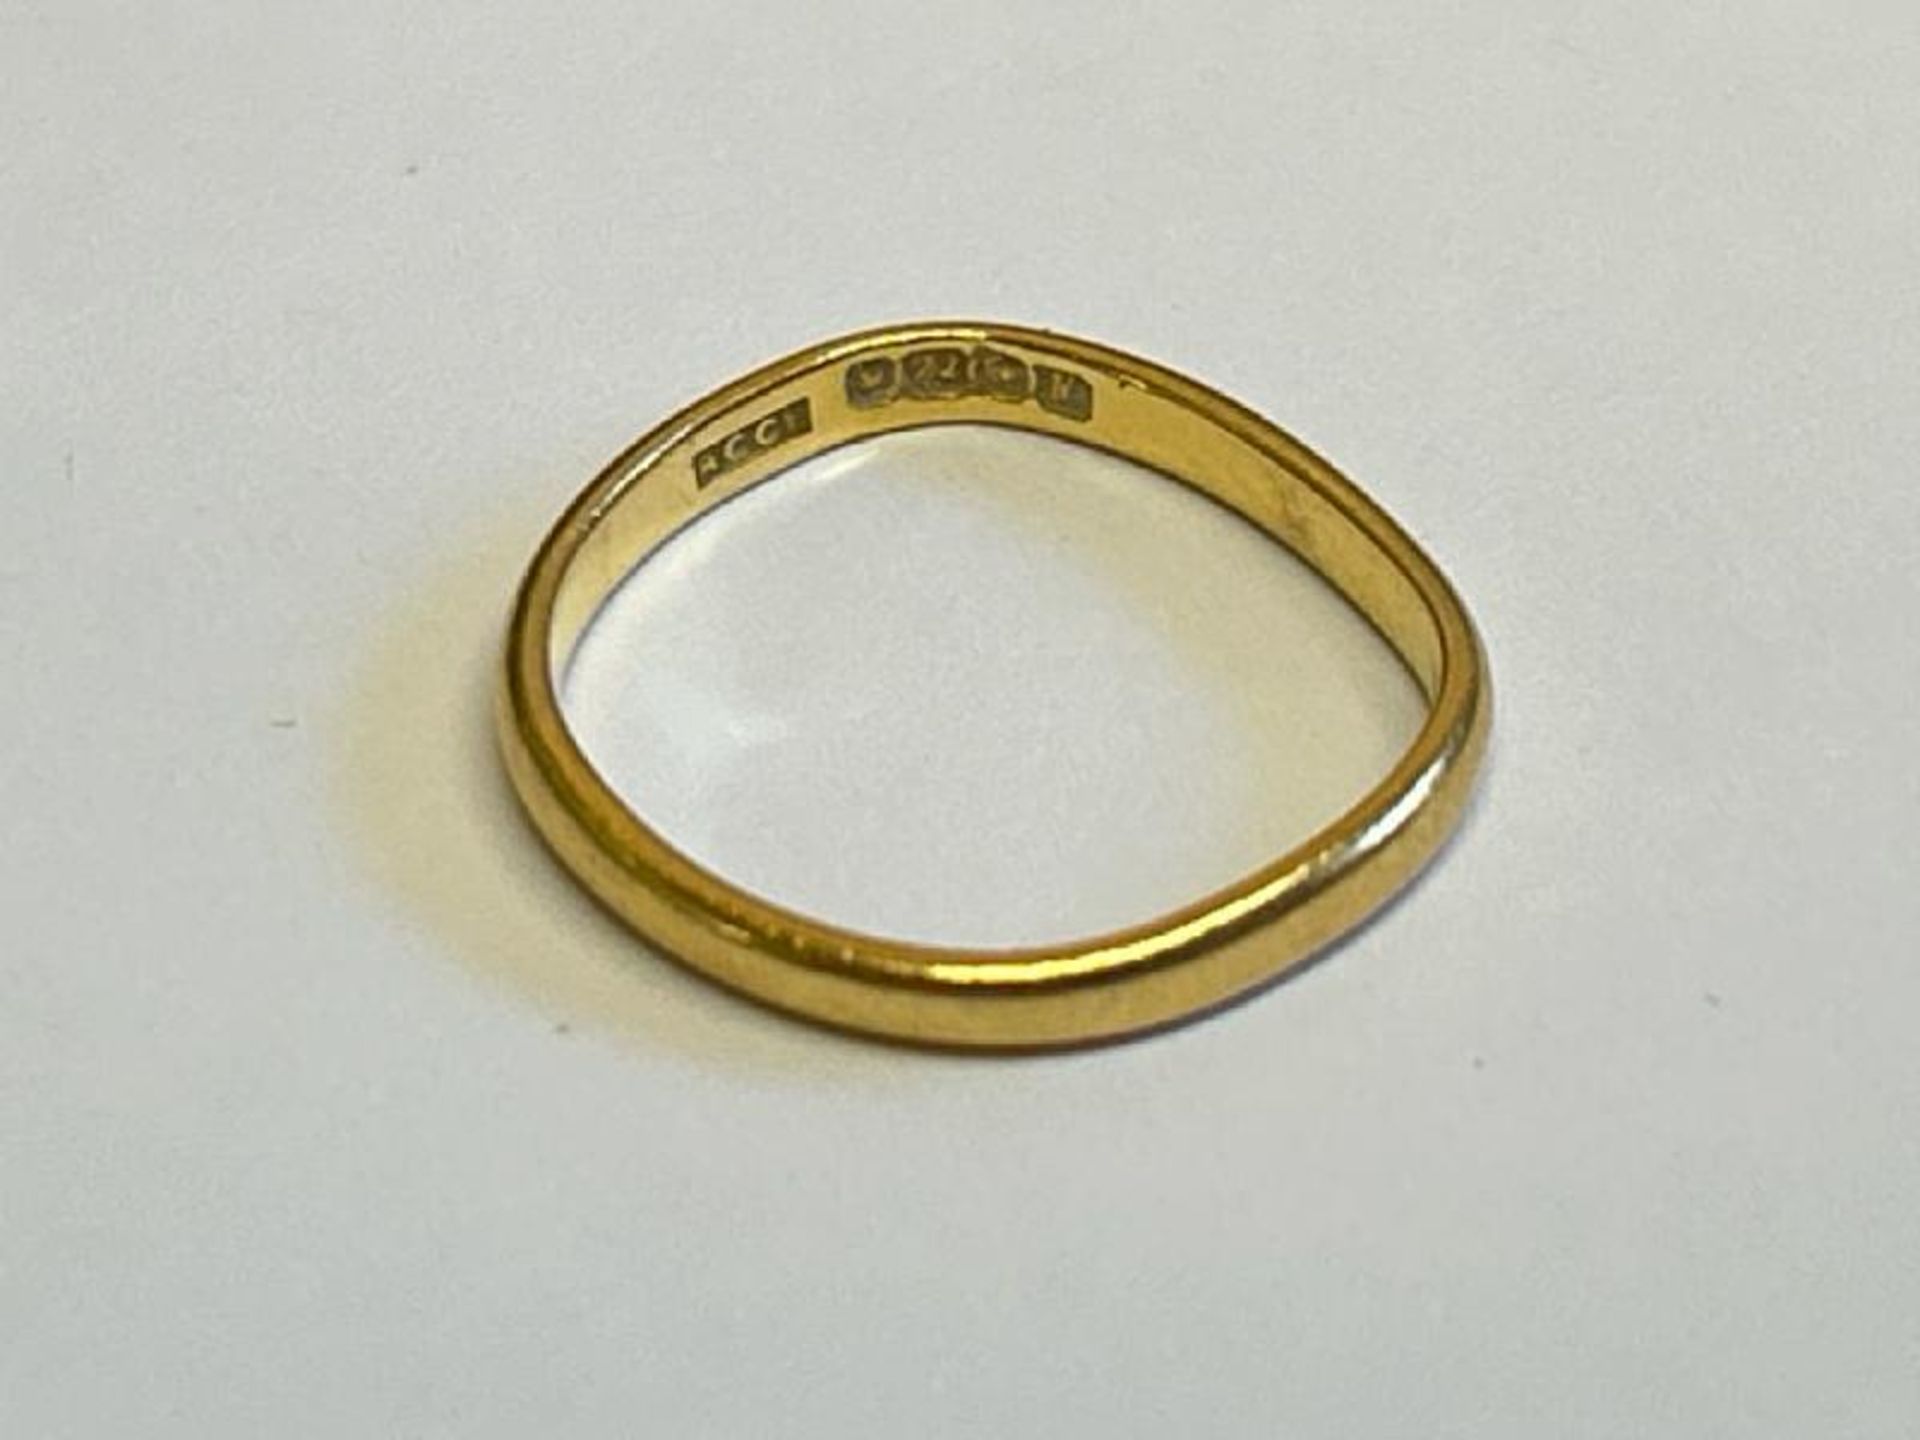 22ct gold hallmarked wedding band, ring size L, gross weight 2.24g / SF